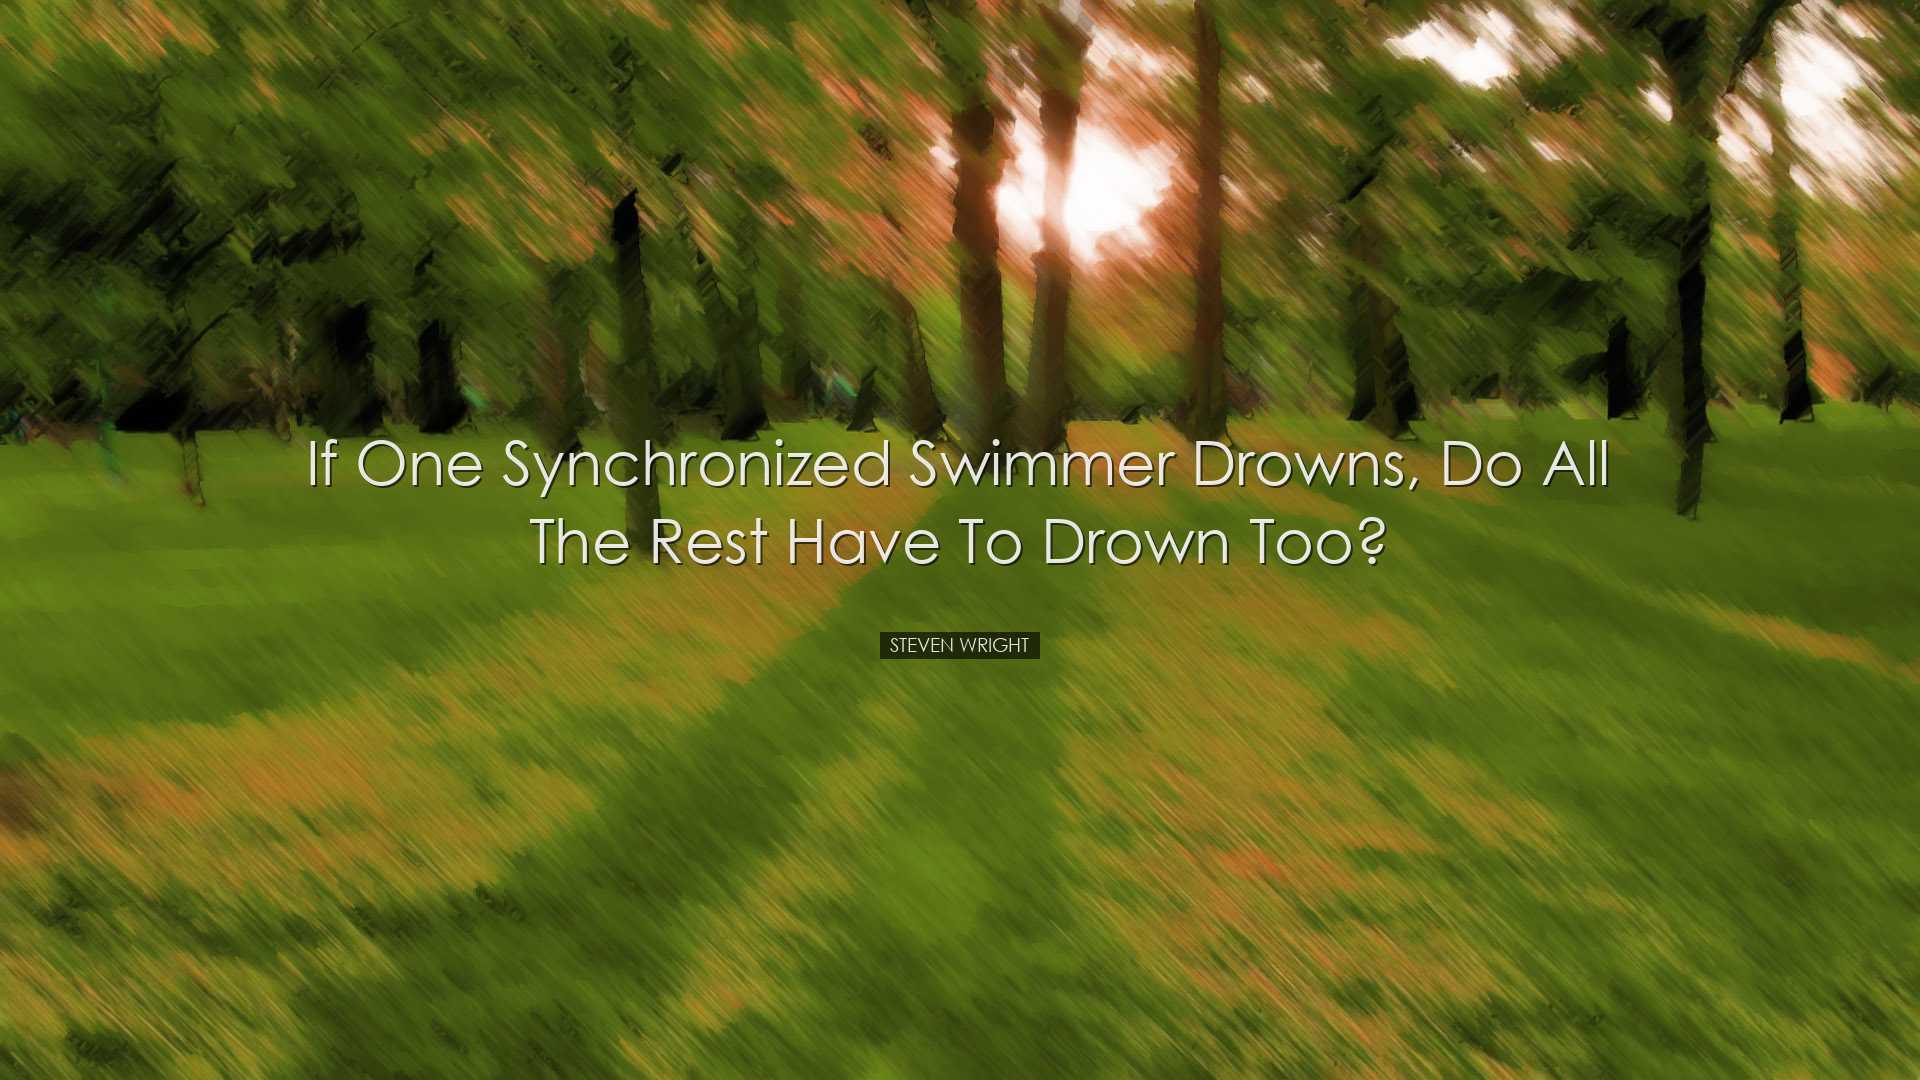 If one synchronized swimmer drowns, do all the rest have to drown